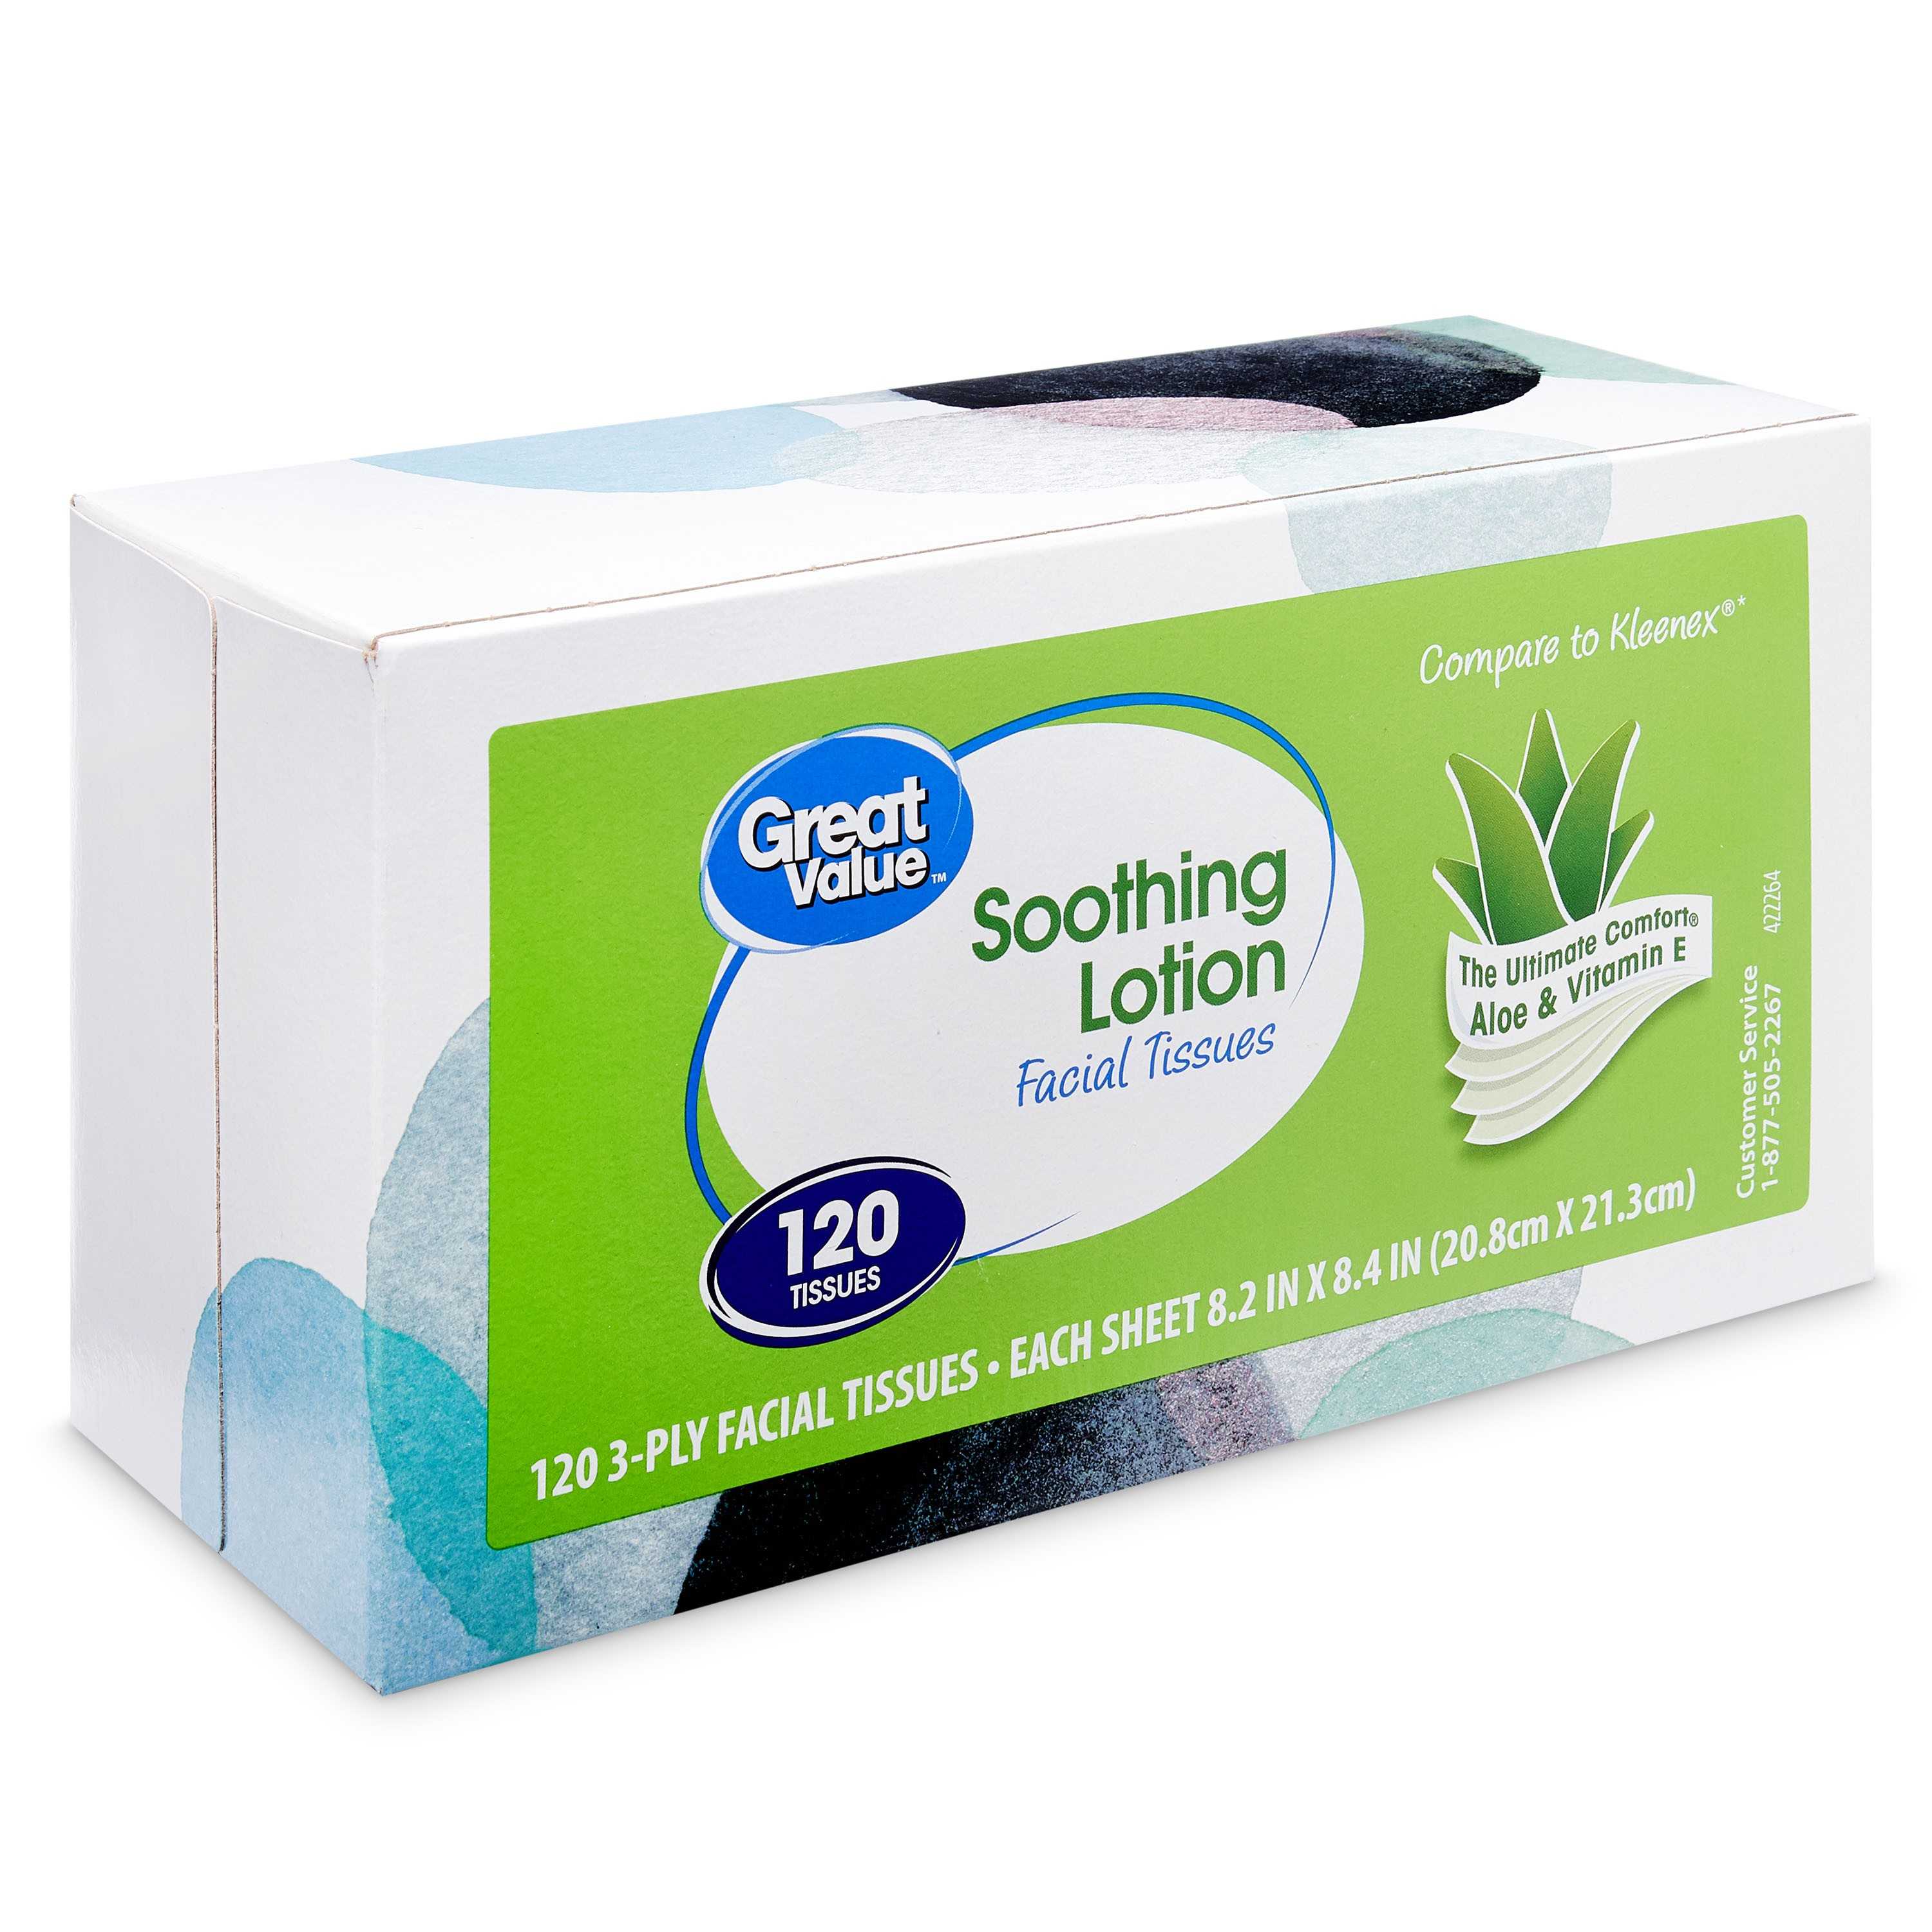 Great Value Soothing Lotion 3-Ply Facial Tissue, 120 Sheets